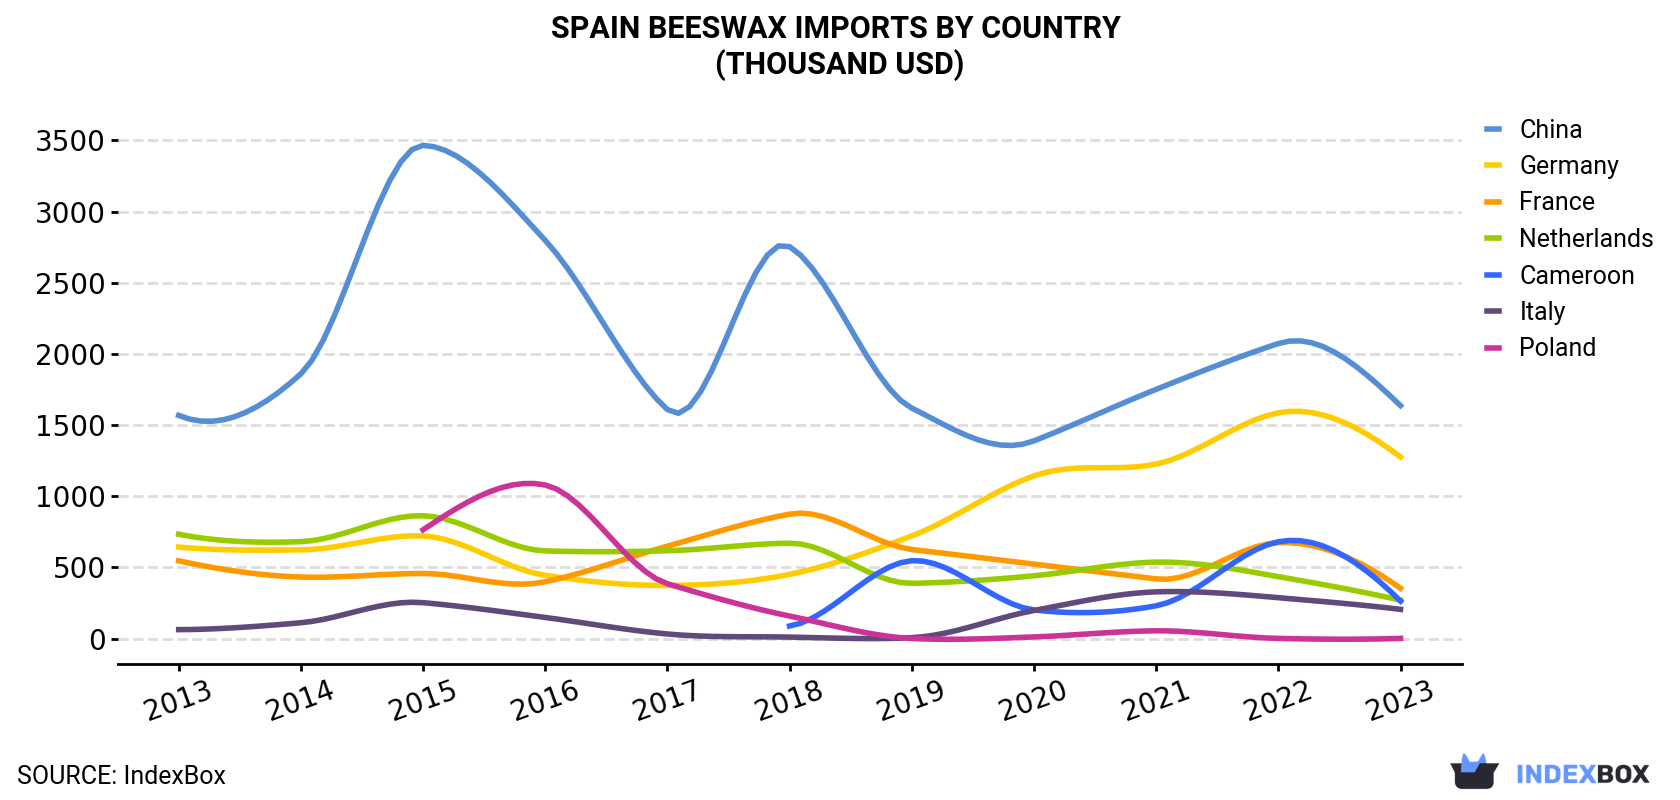 Spain Beeswax Imports By Country (Thousand USD)